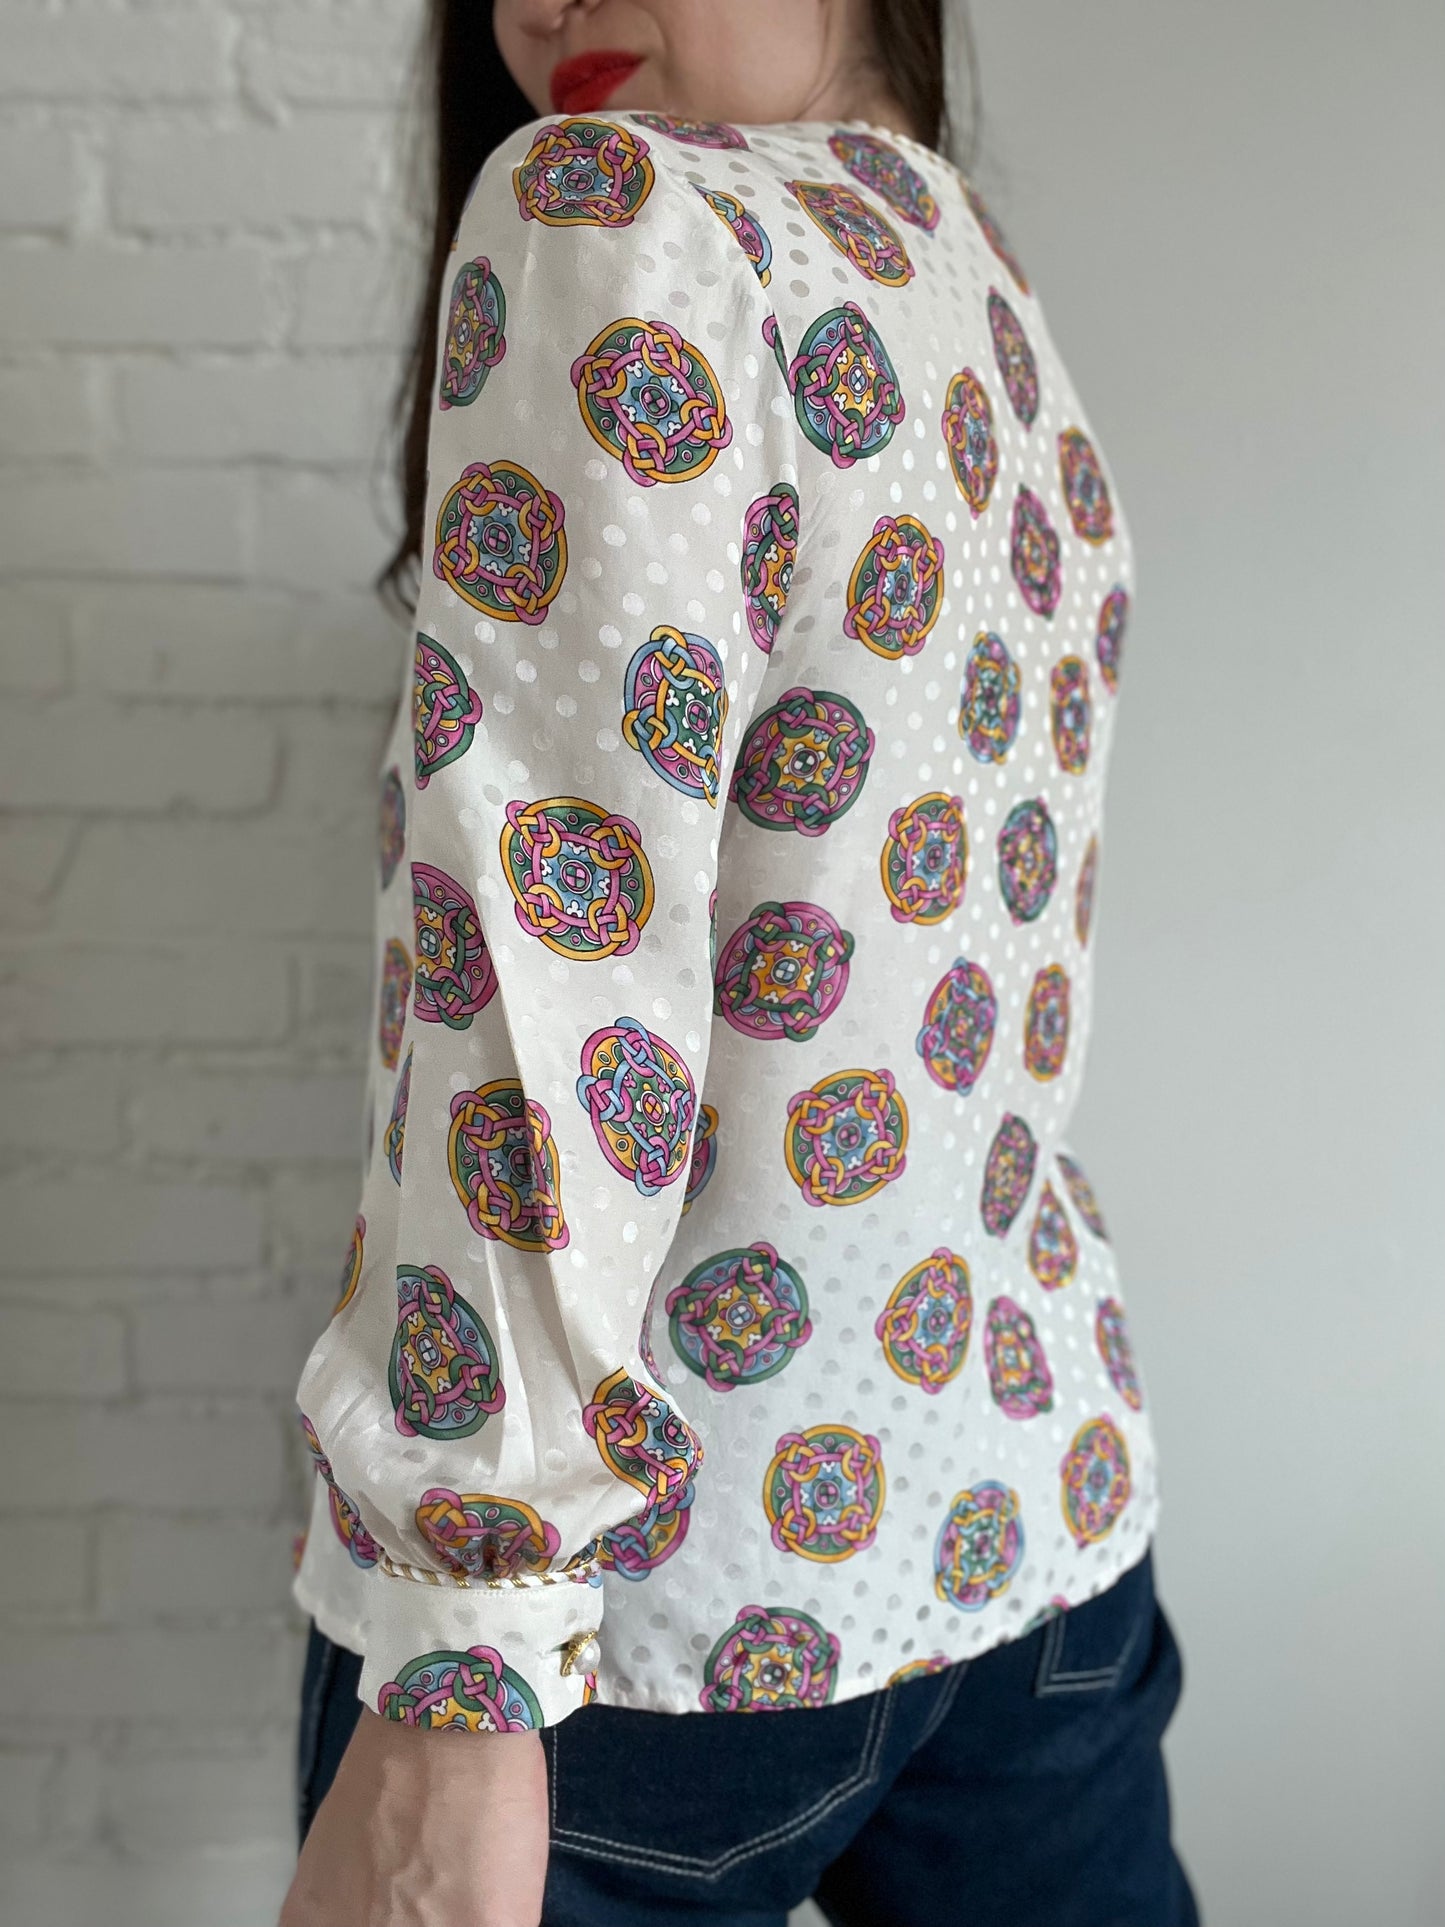 Ruth's Colourful Luxury Blouse - M/L